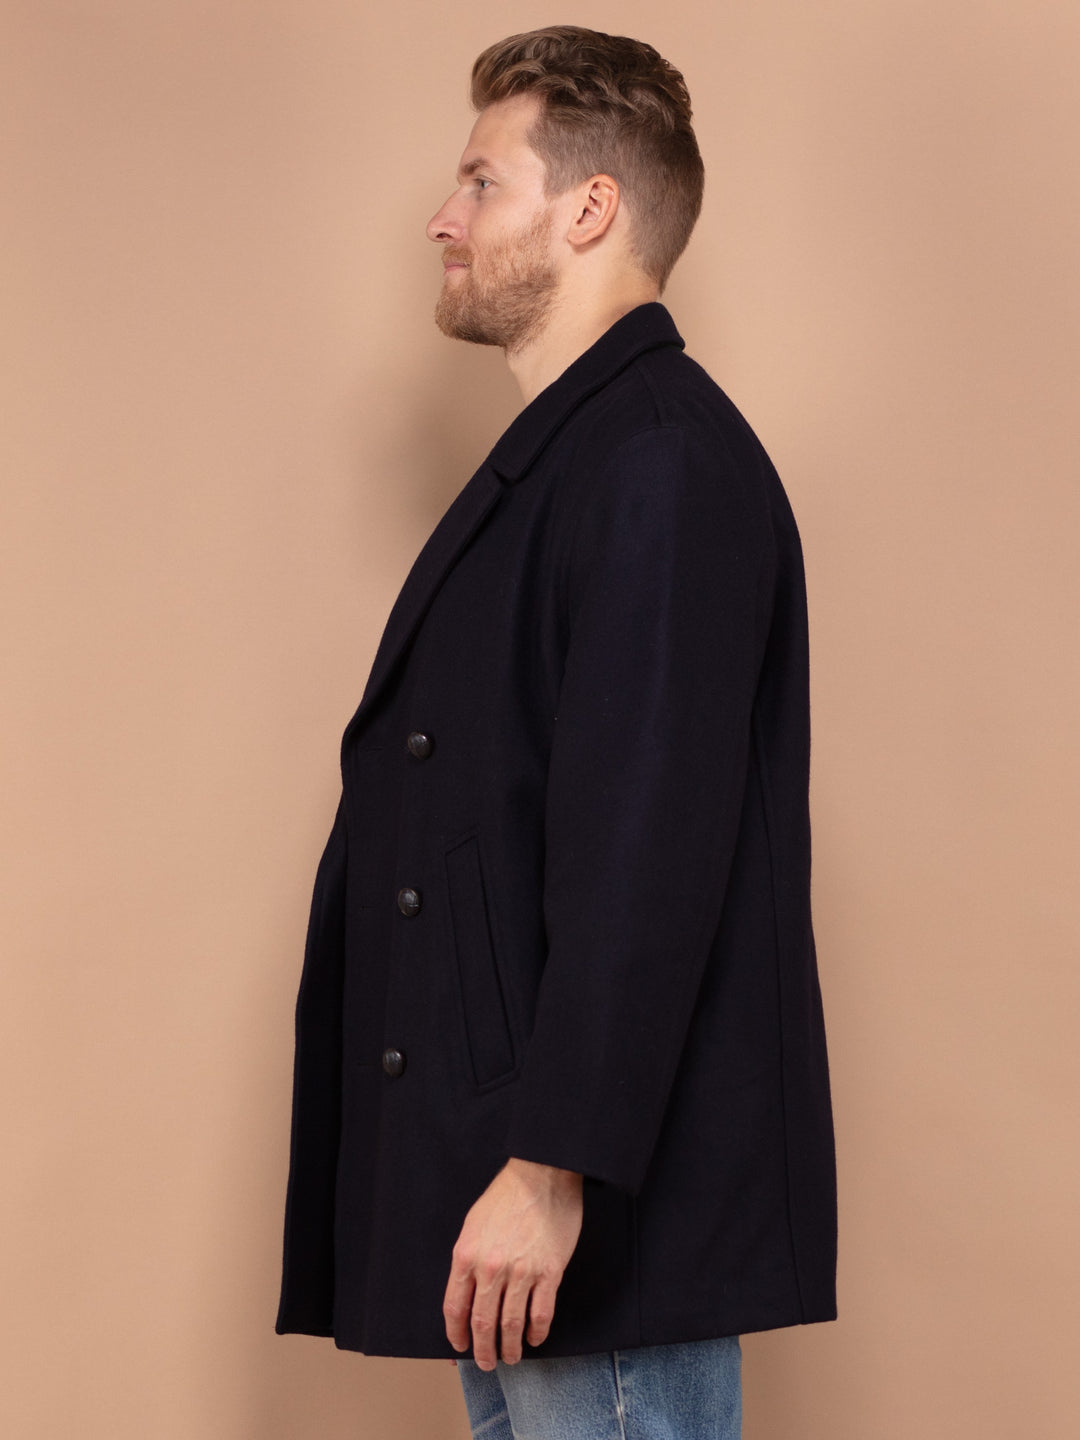 Men Wool Peacoat, 80's Classic Wool Coat Size L, Double Breasted Wool Coat, Vintage Clothing, Navy Blue Wool Mens Coat, Men Clothing, L Coat